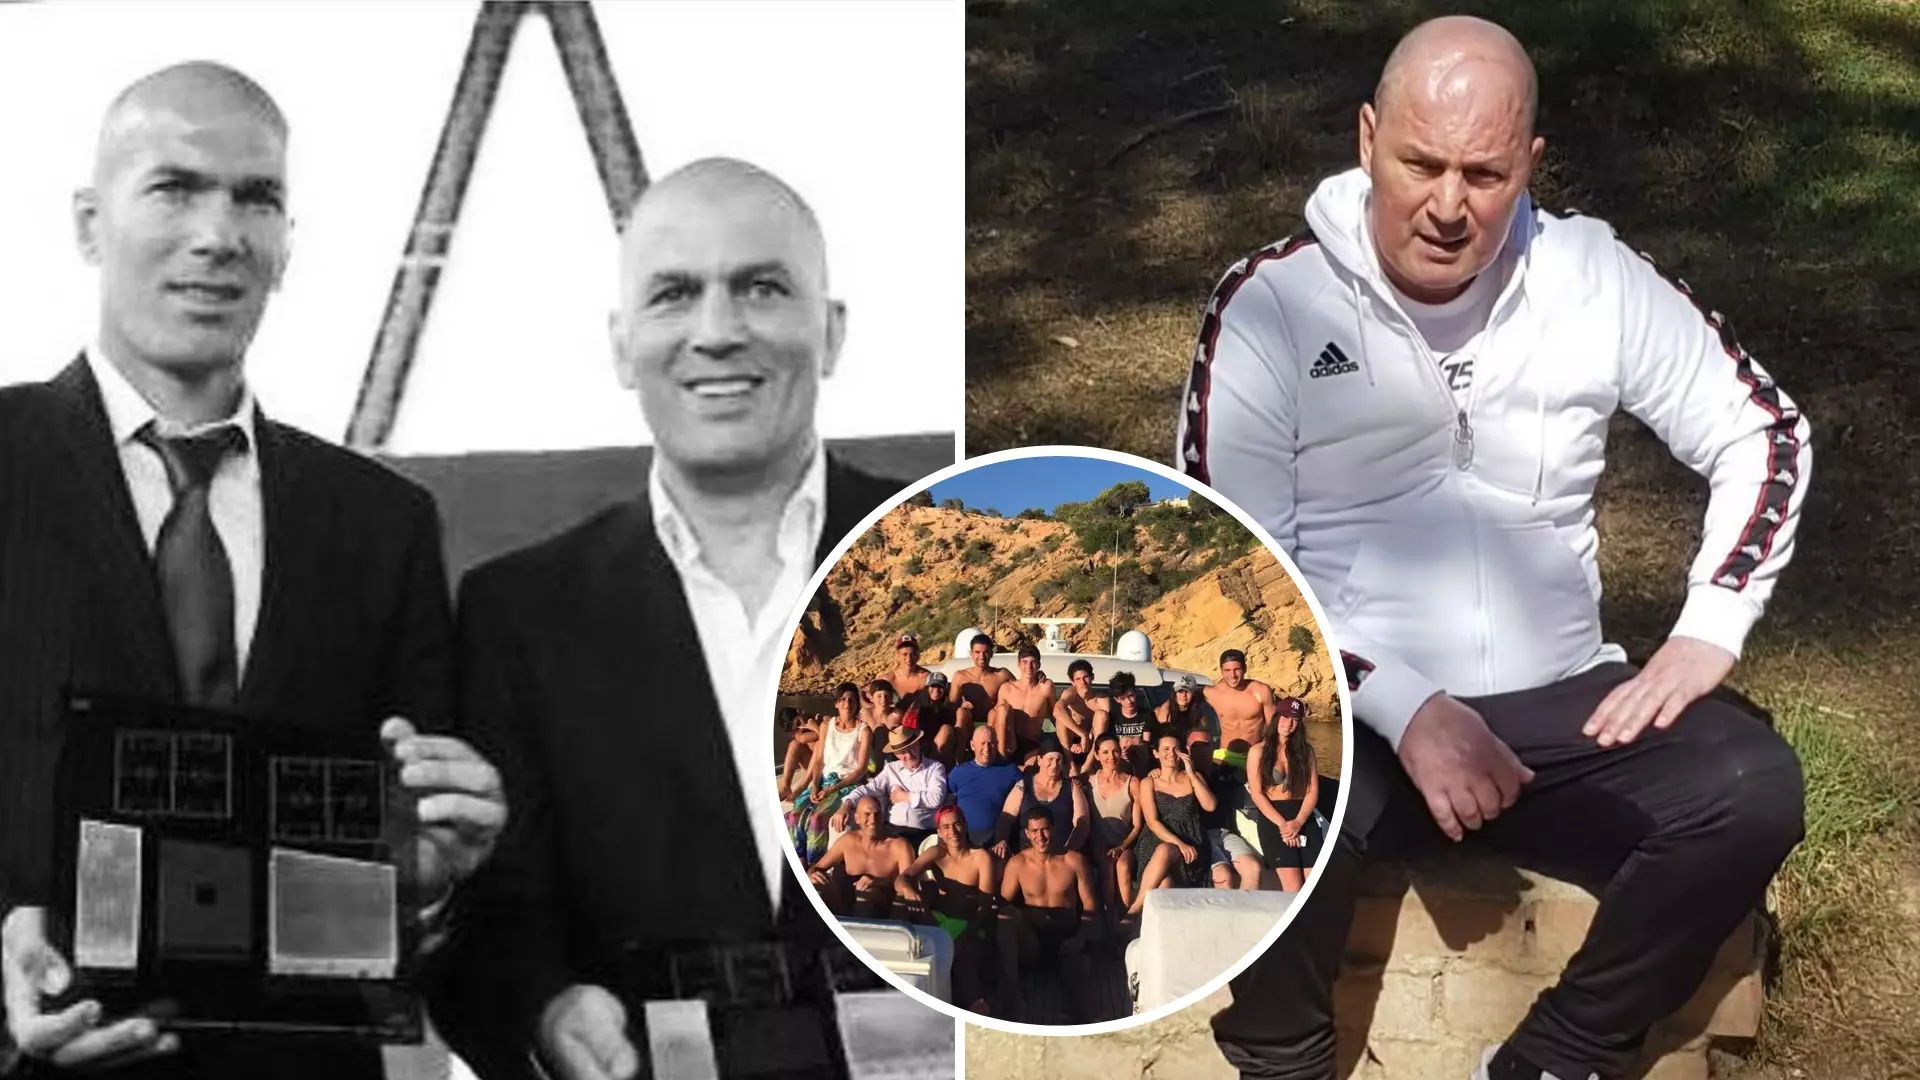 Zinedine Zidane Posted An Emotional Tribute To His Big Brother After He Died Of Cancer